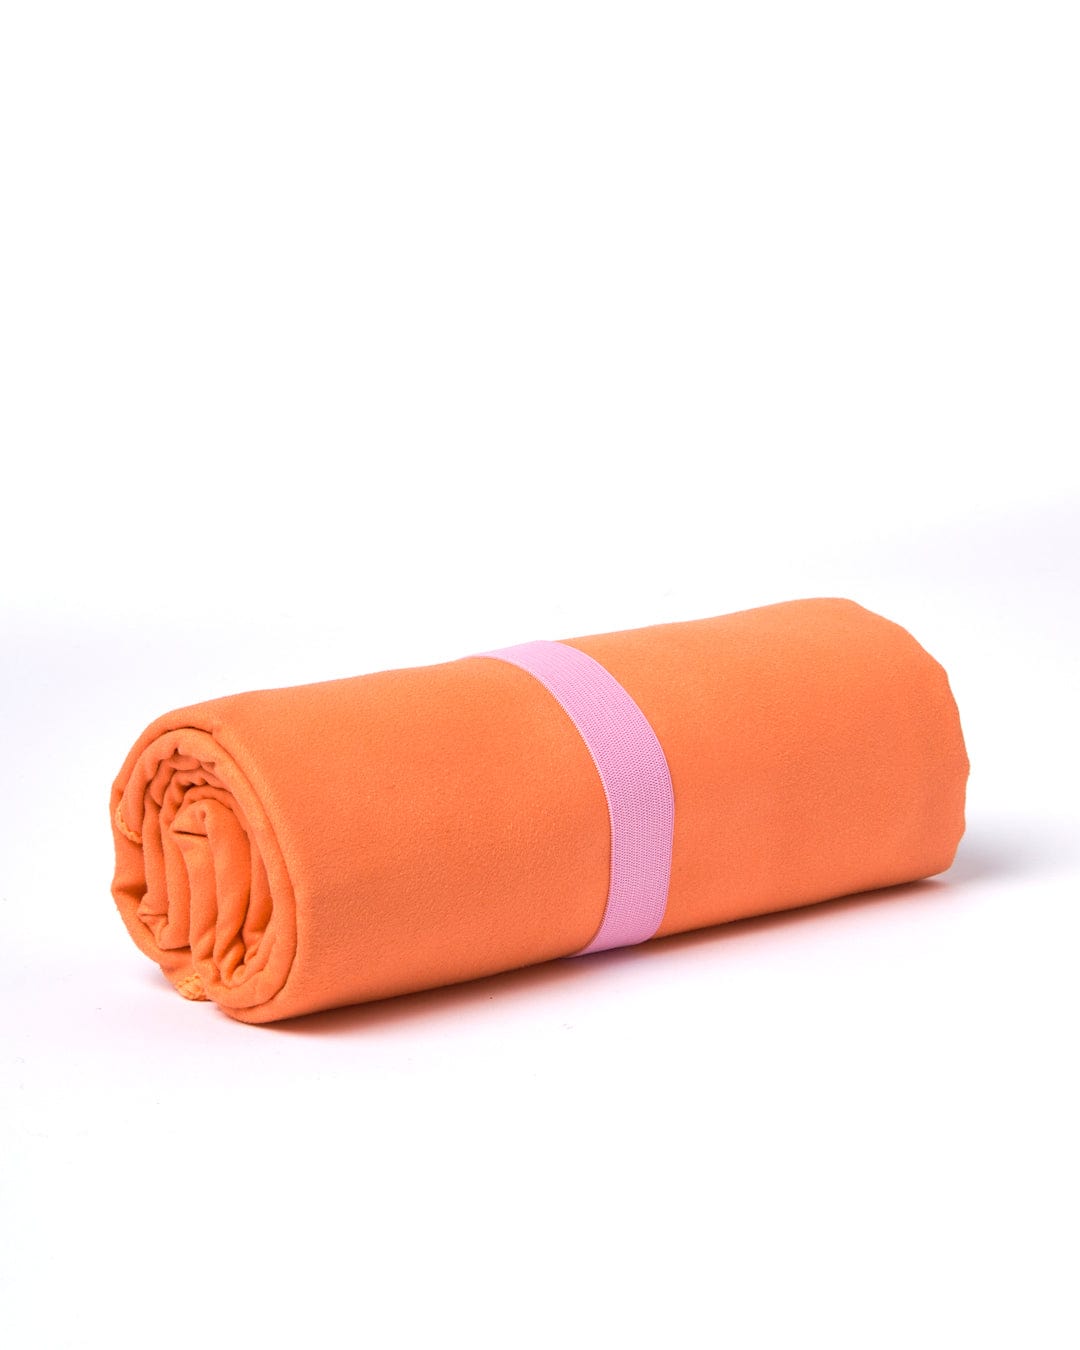 A rolled up Saltrock Cold Water Club - Microfibre Towel in Orange on a white background.